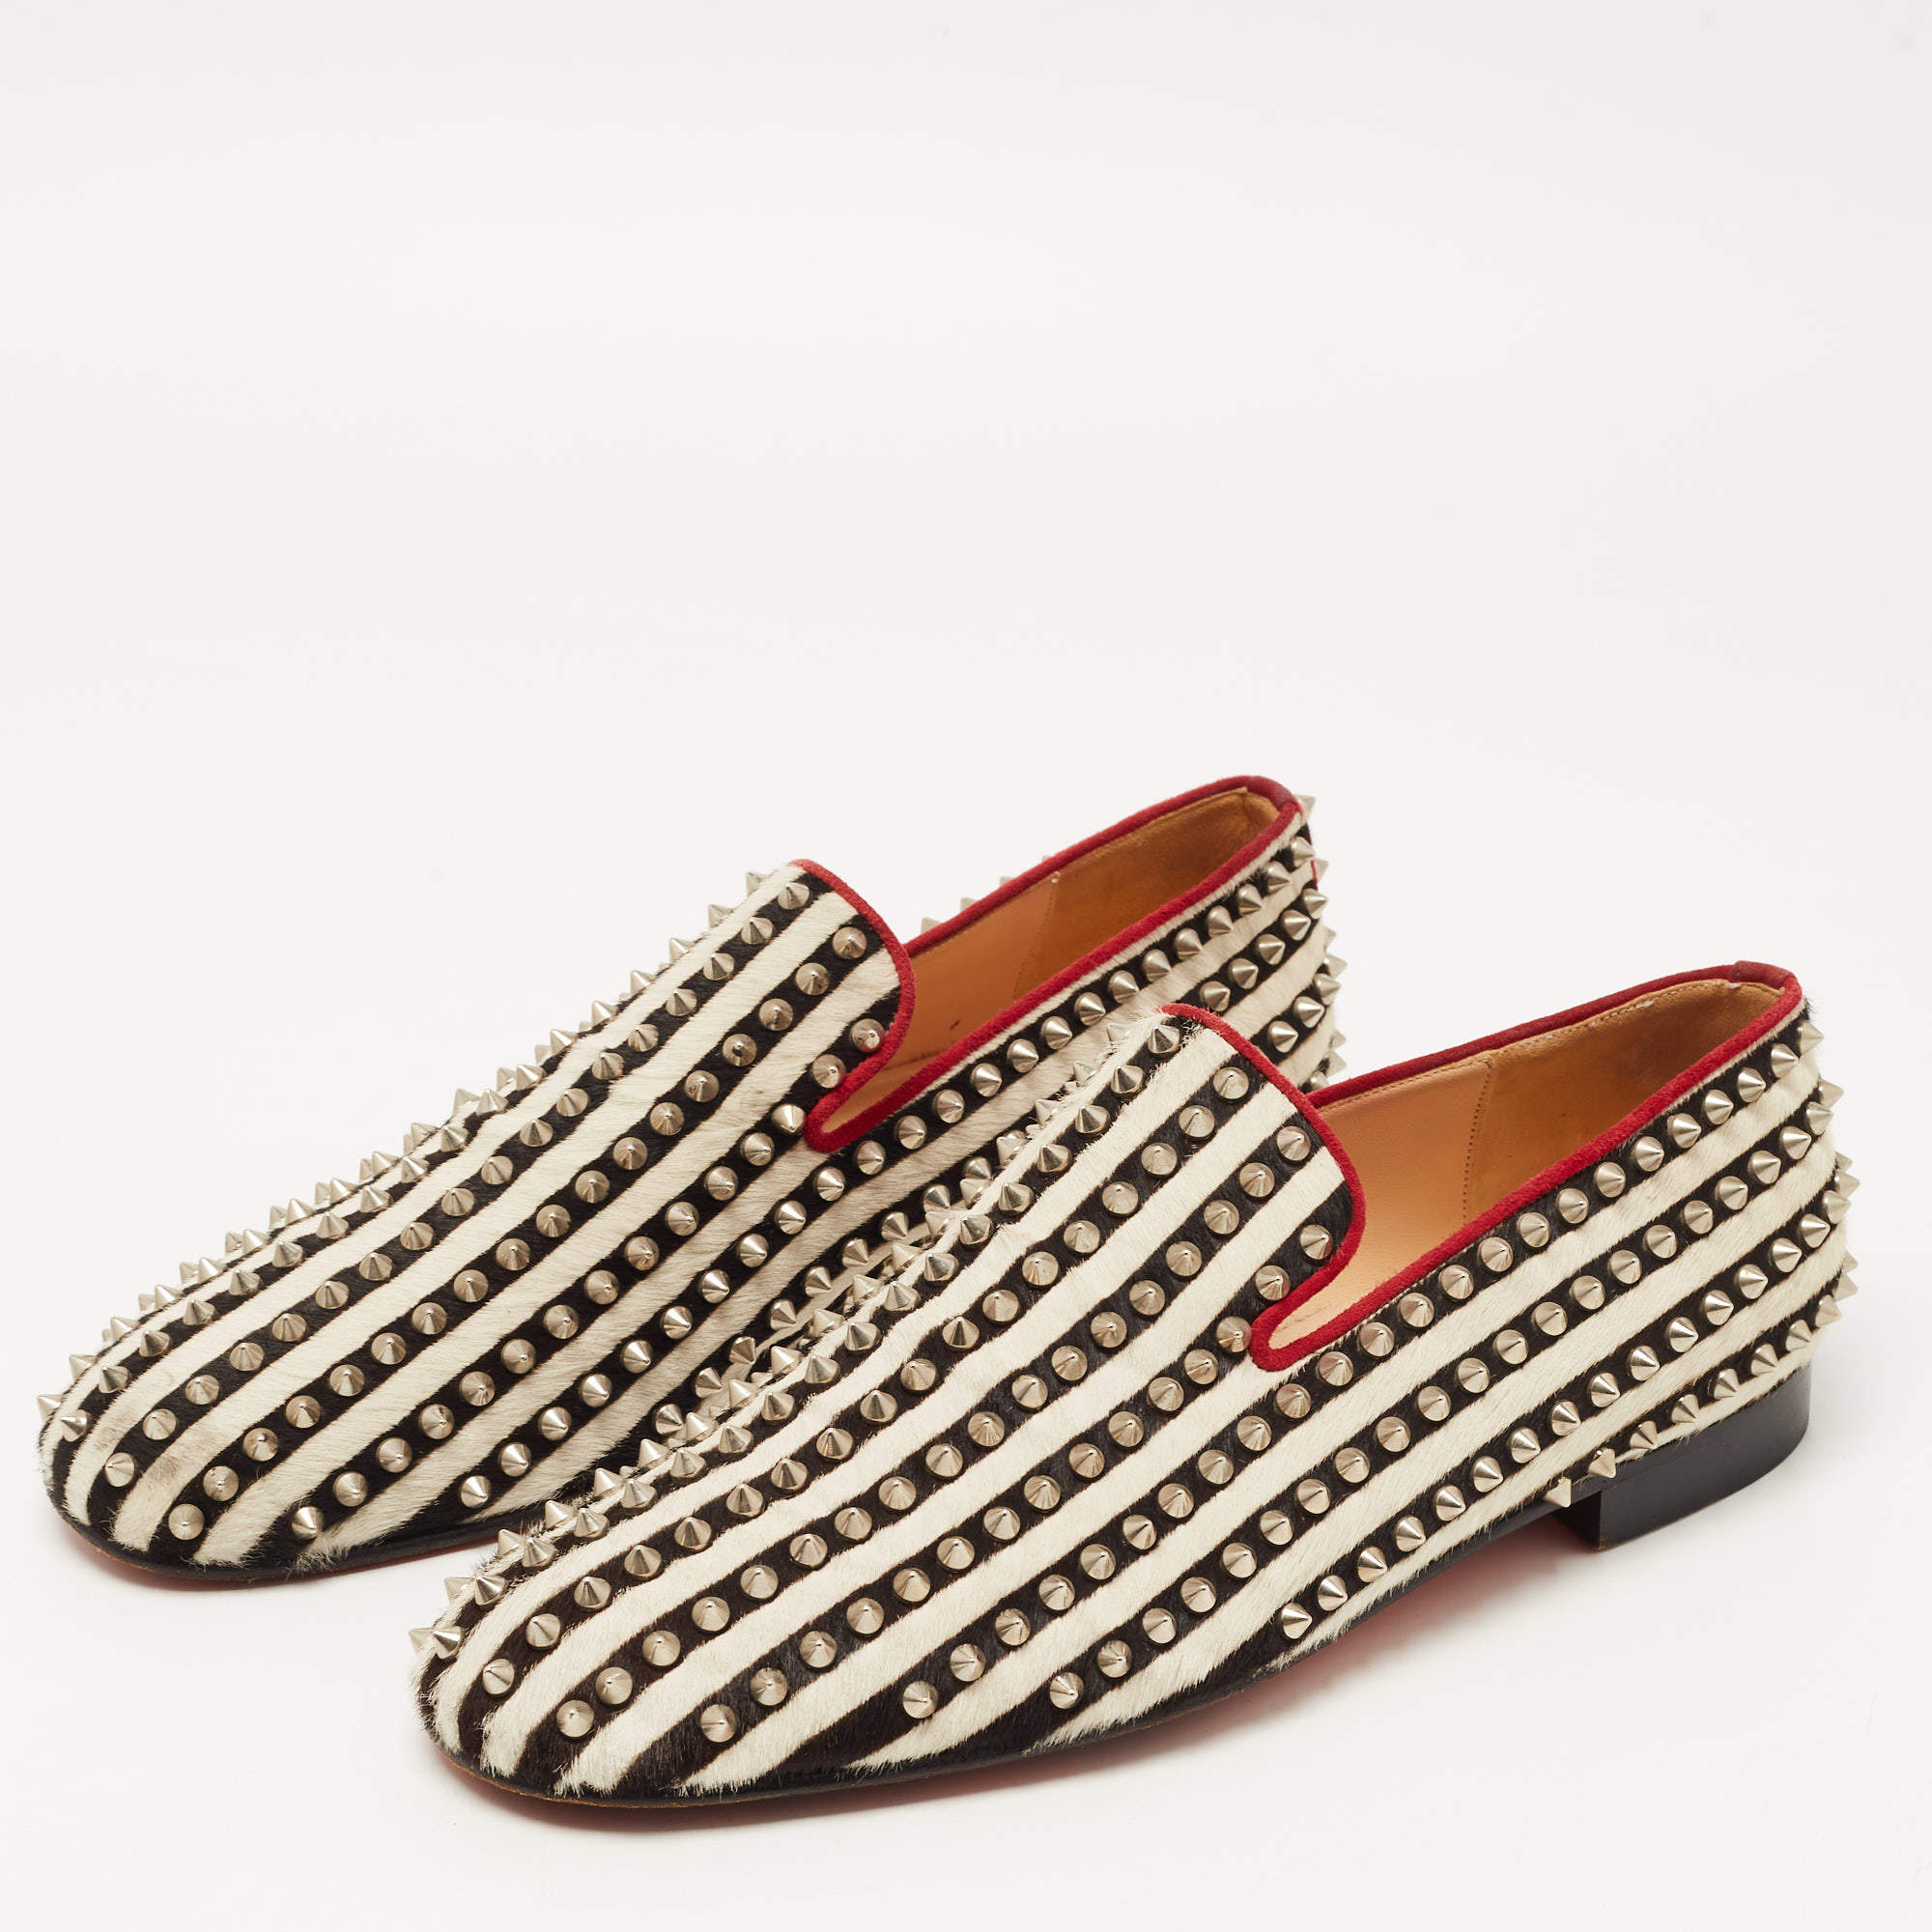 CHRISTIAN LOUBOUTIN Rollerboy Mixed Spikes Leather Flats Loafers Men's Sz  42 NEW